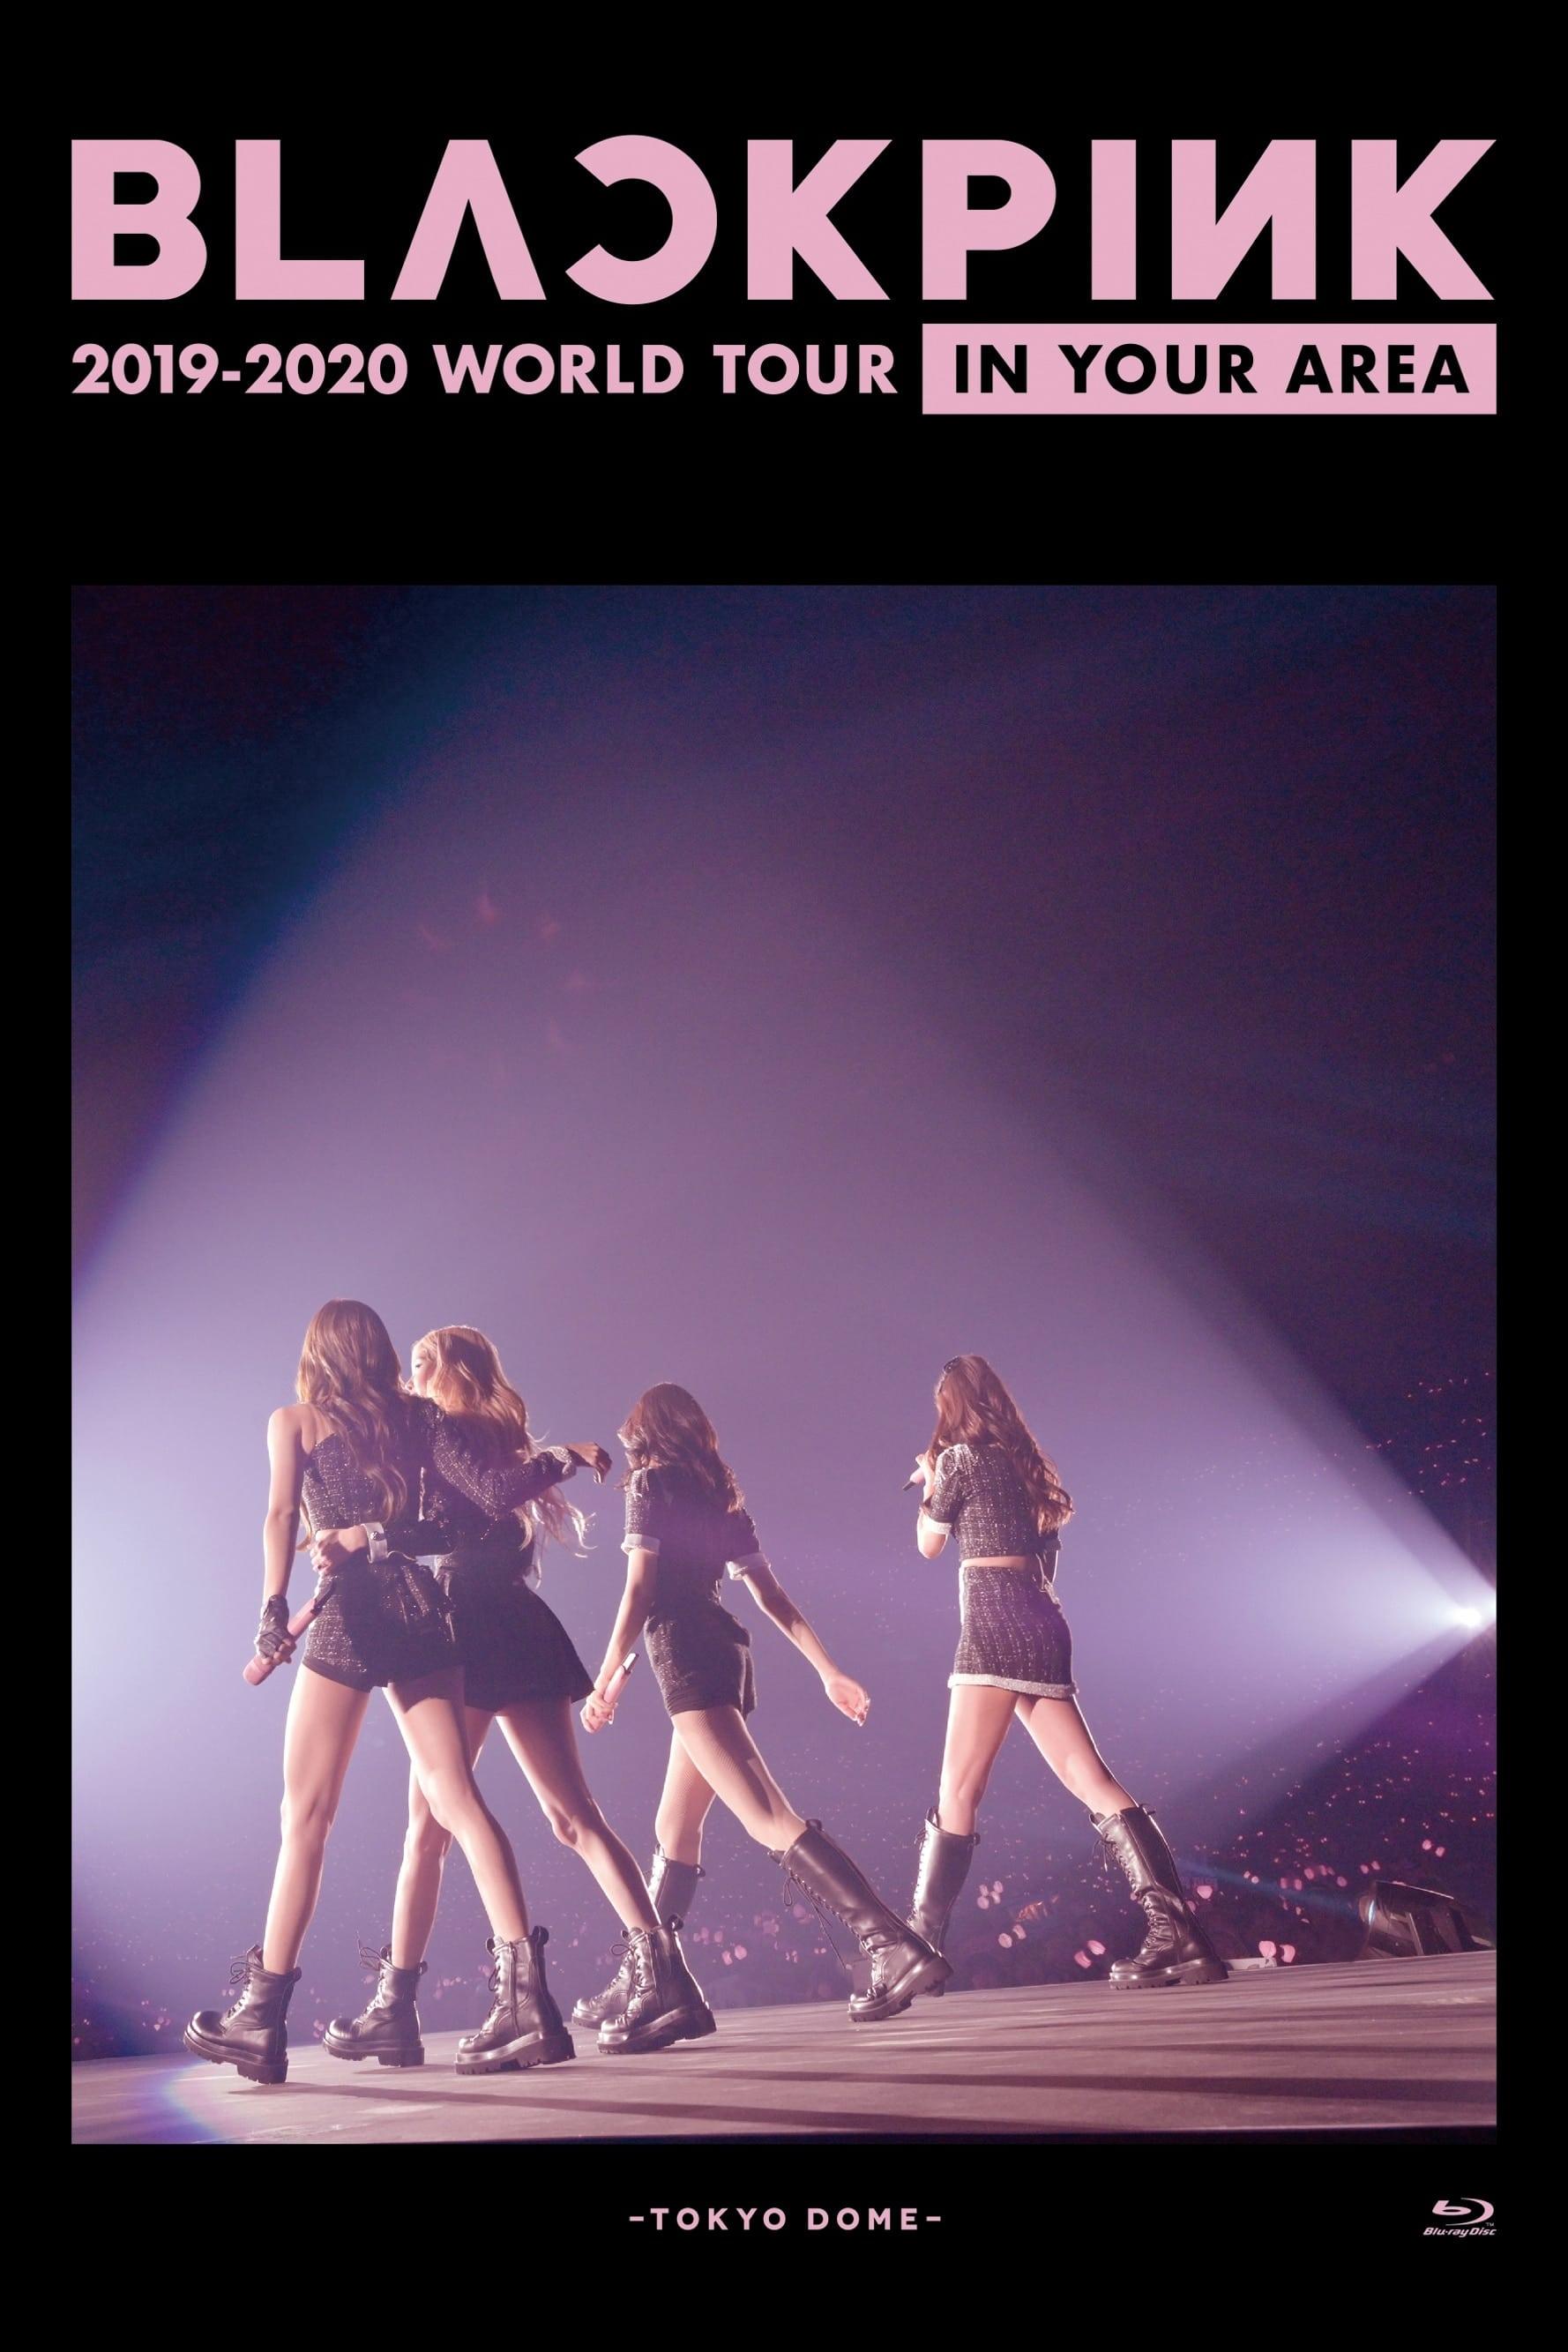 BLACKPINK: In Your Area 2019-2020 World Tour -Tokyo Dome- poster